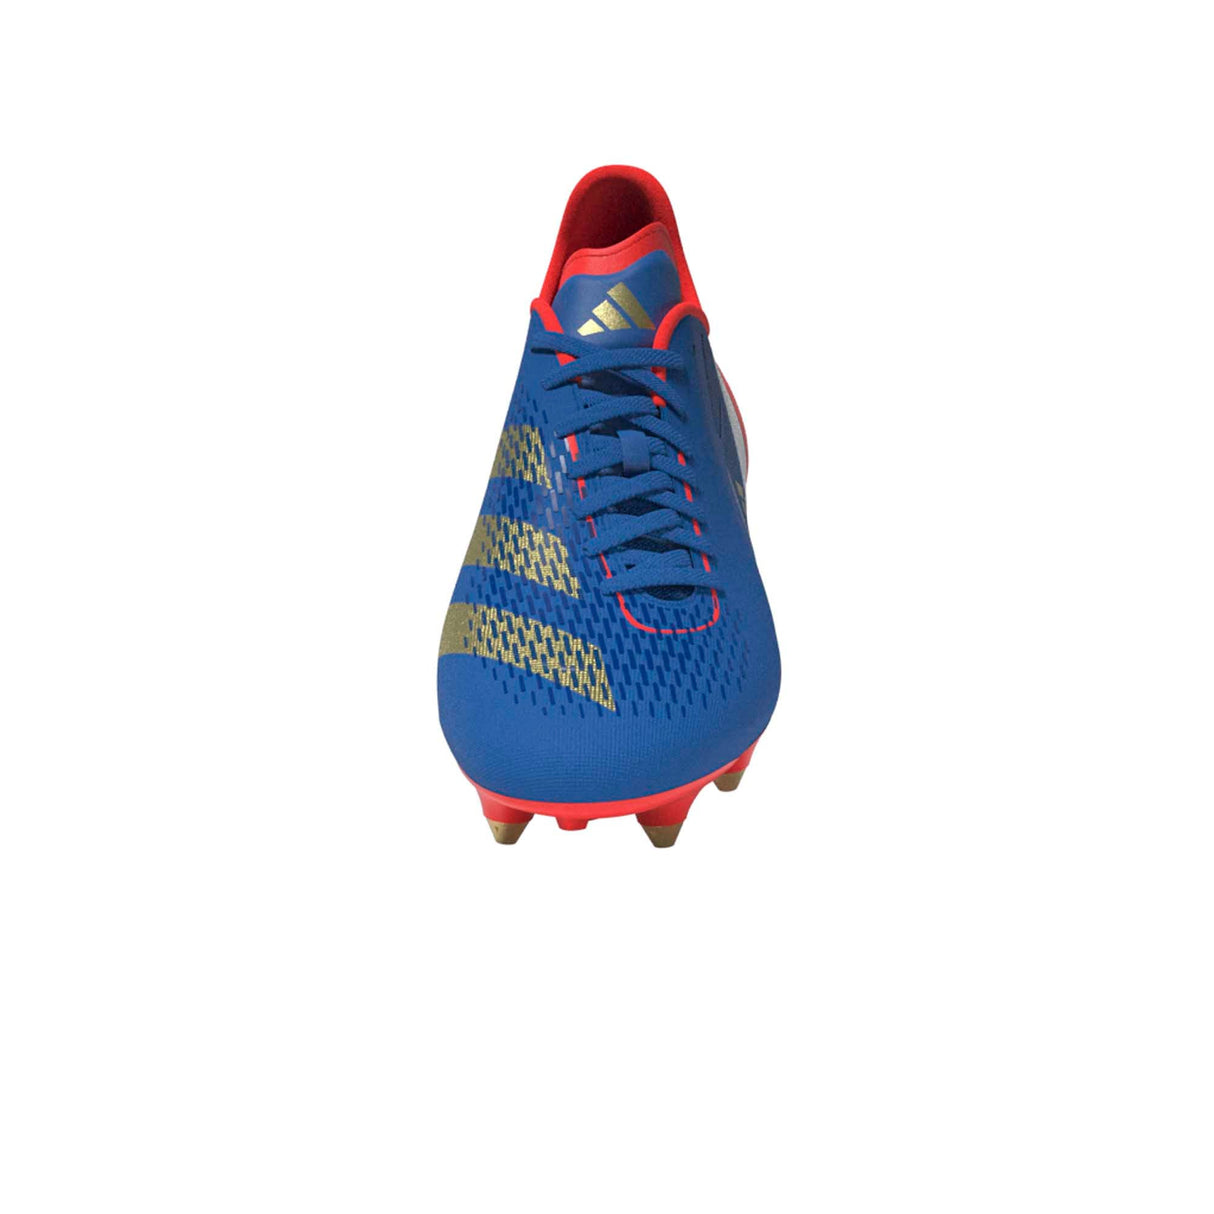 Adidas Adults Adizero RS15 Pro Rugby Boots - Soft Ground |Boots | Adidas | Absolute Rugby